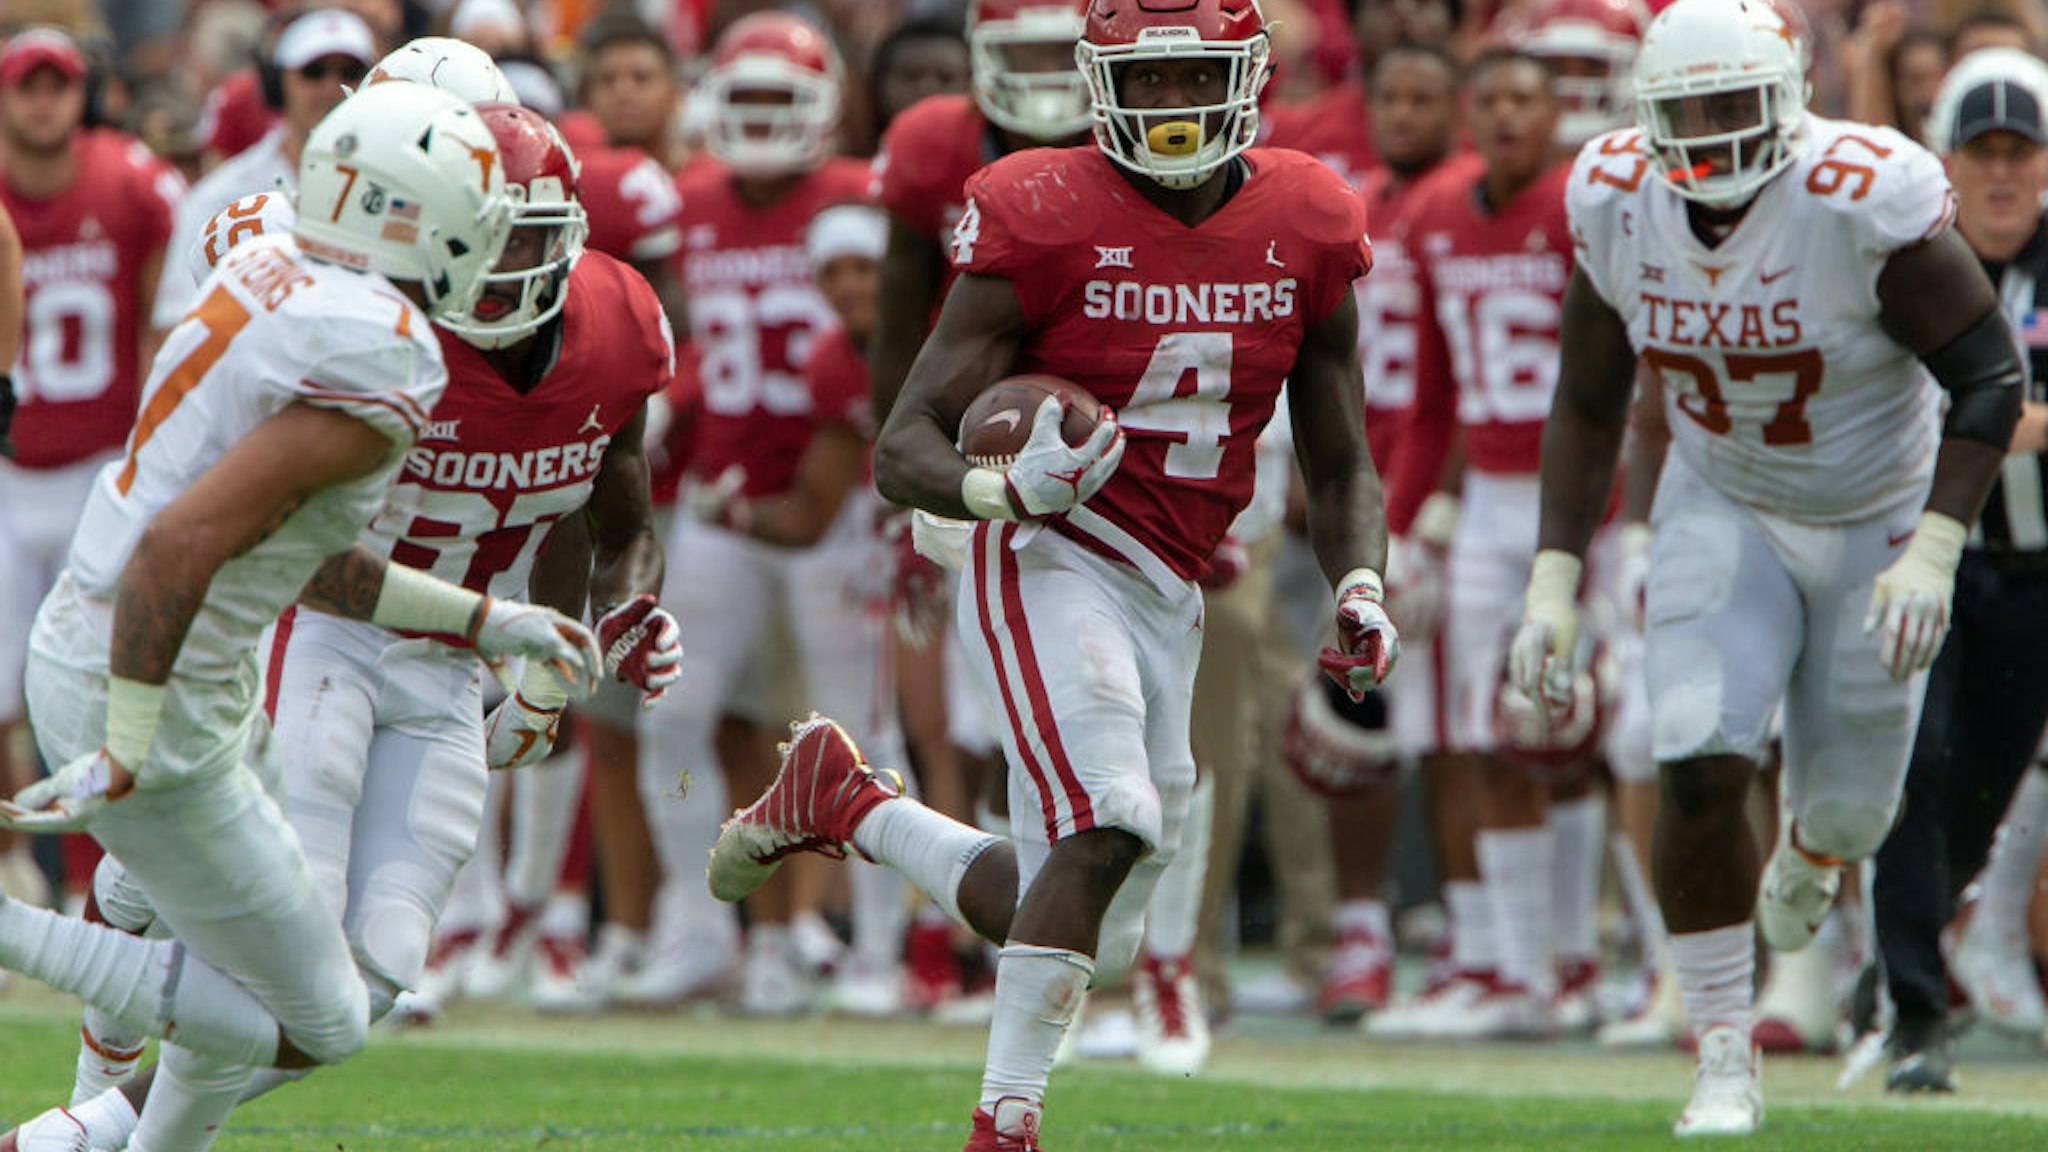 DALLAS, TX - OCTOBER 06: Oklahoma Sooners running back Trey Sermon (4) during the Big 12 Conference Red River Rivalry game against the Texas Longhorns on October 6, 2018 at Cotton Bowl Stadium in Dallas, Texas. (Photo by William Purnell/Icon Sportswire via Getty Images)